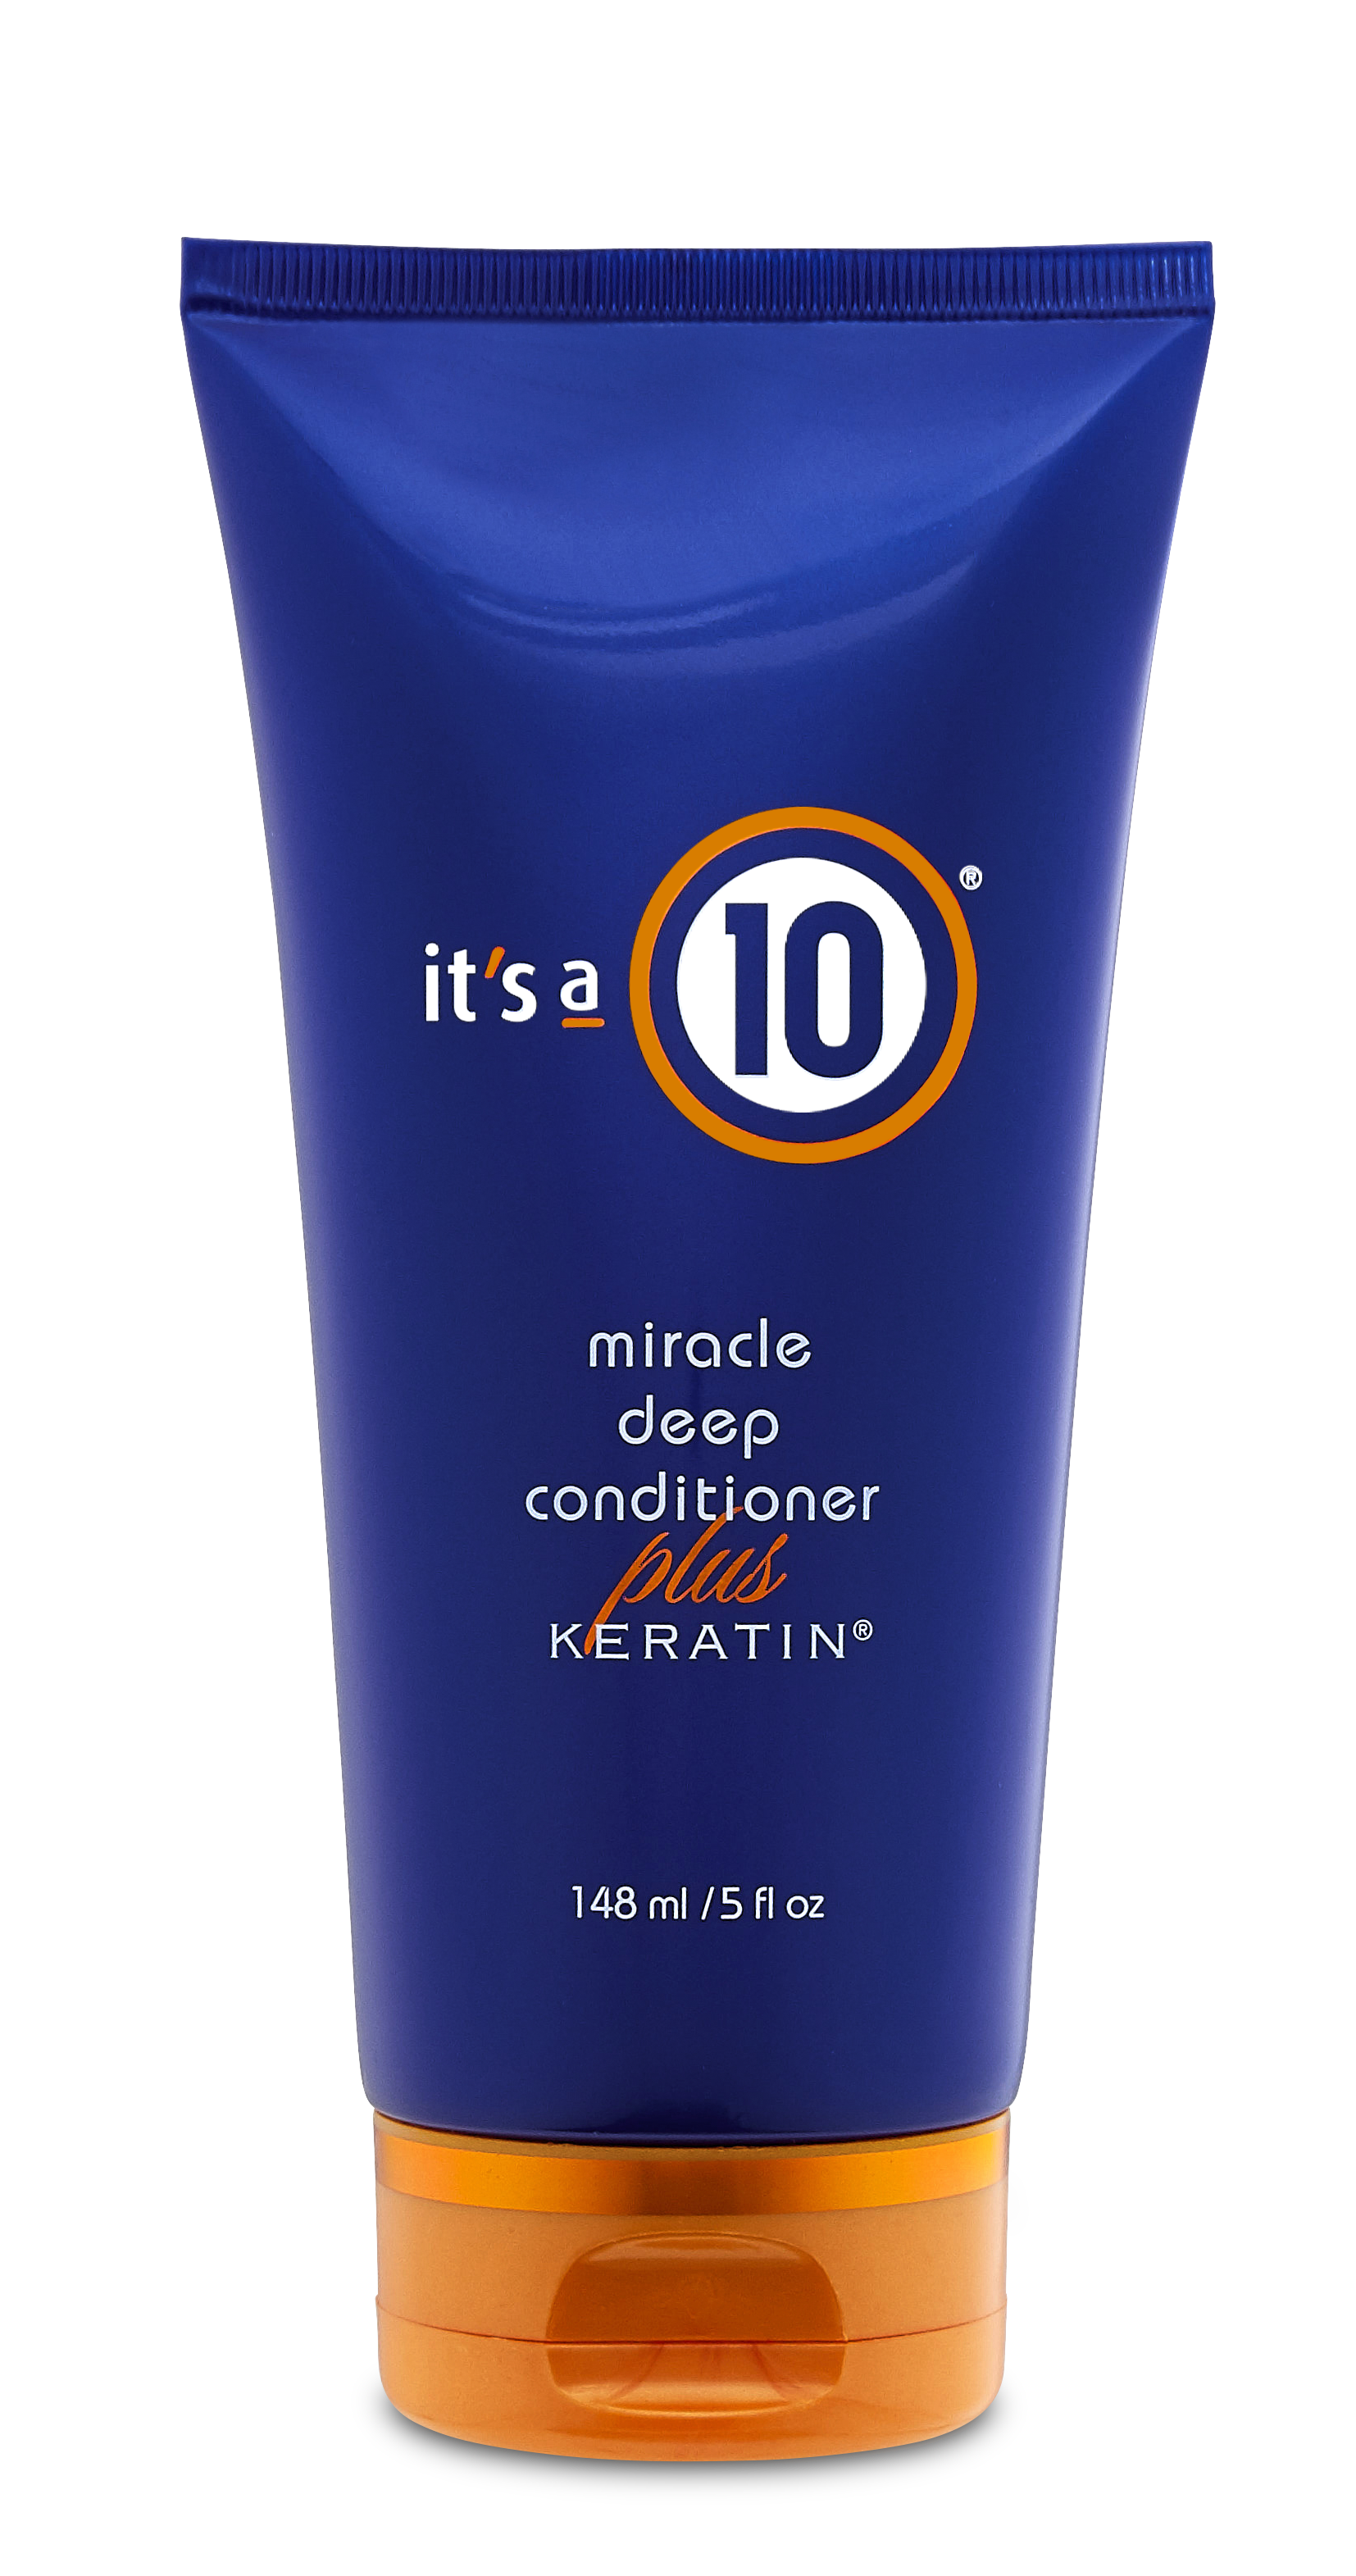 It's a 10 Miracle Deep Conditioner plus Keratin